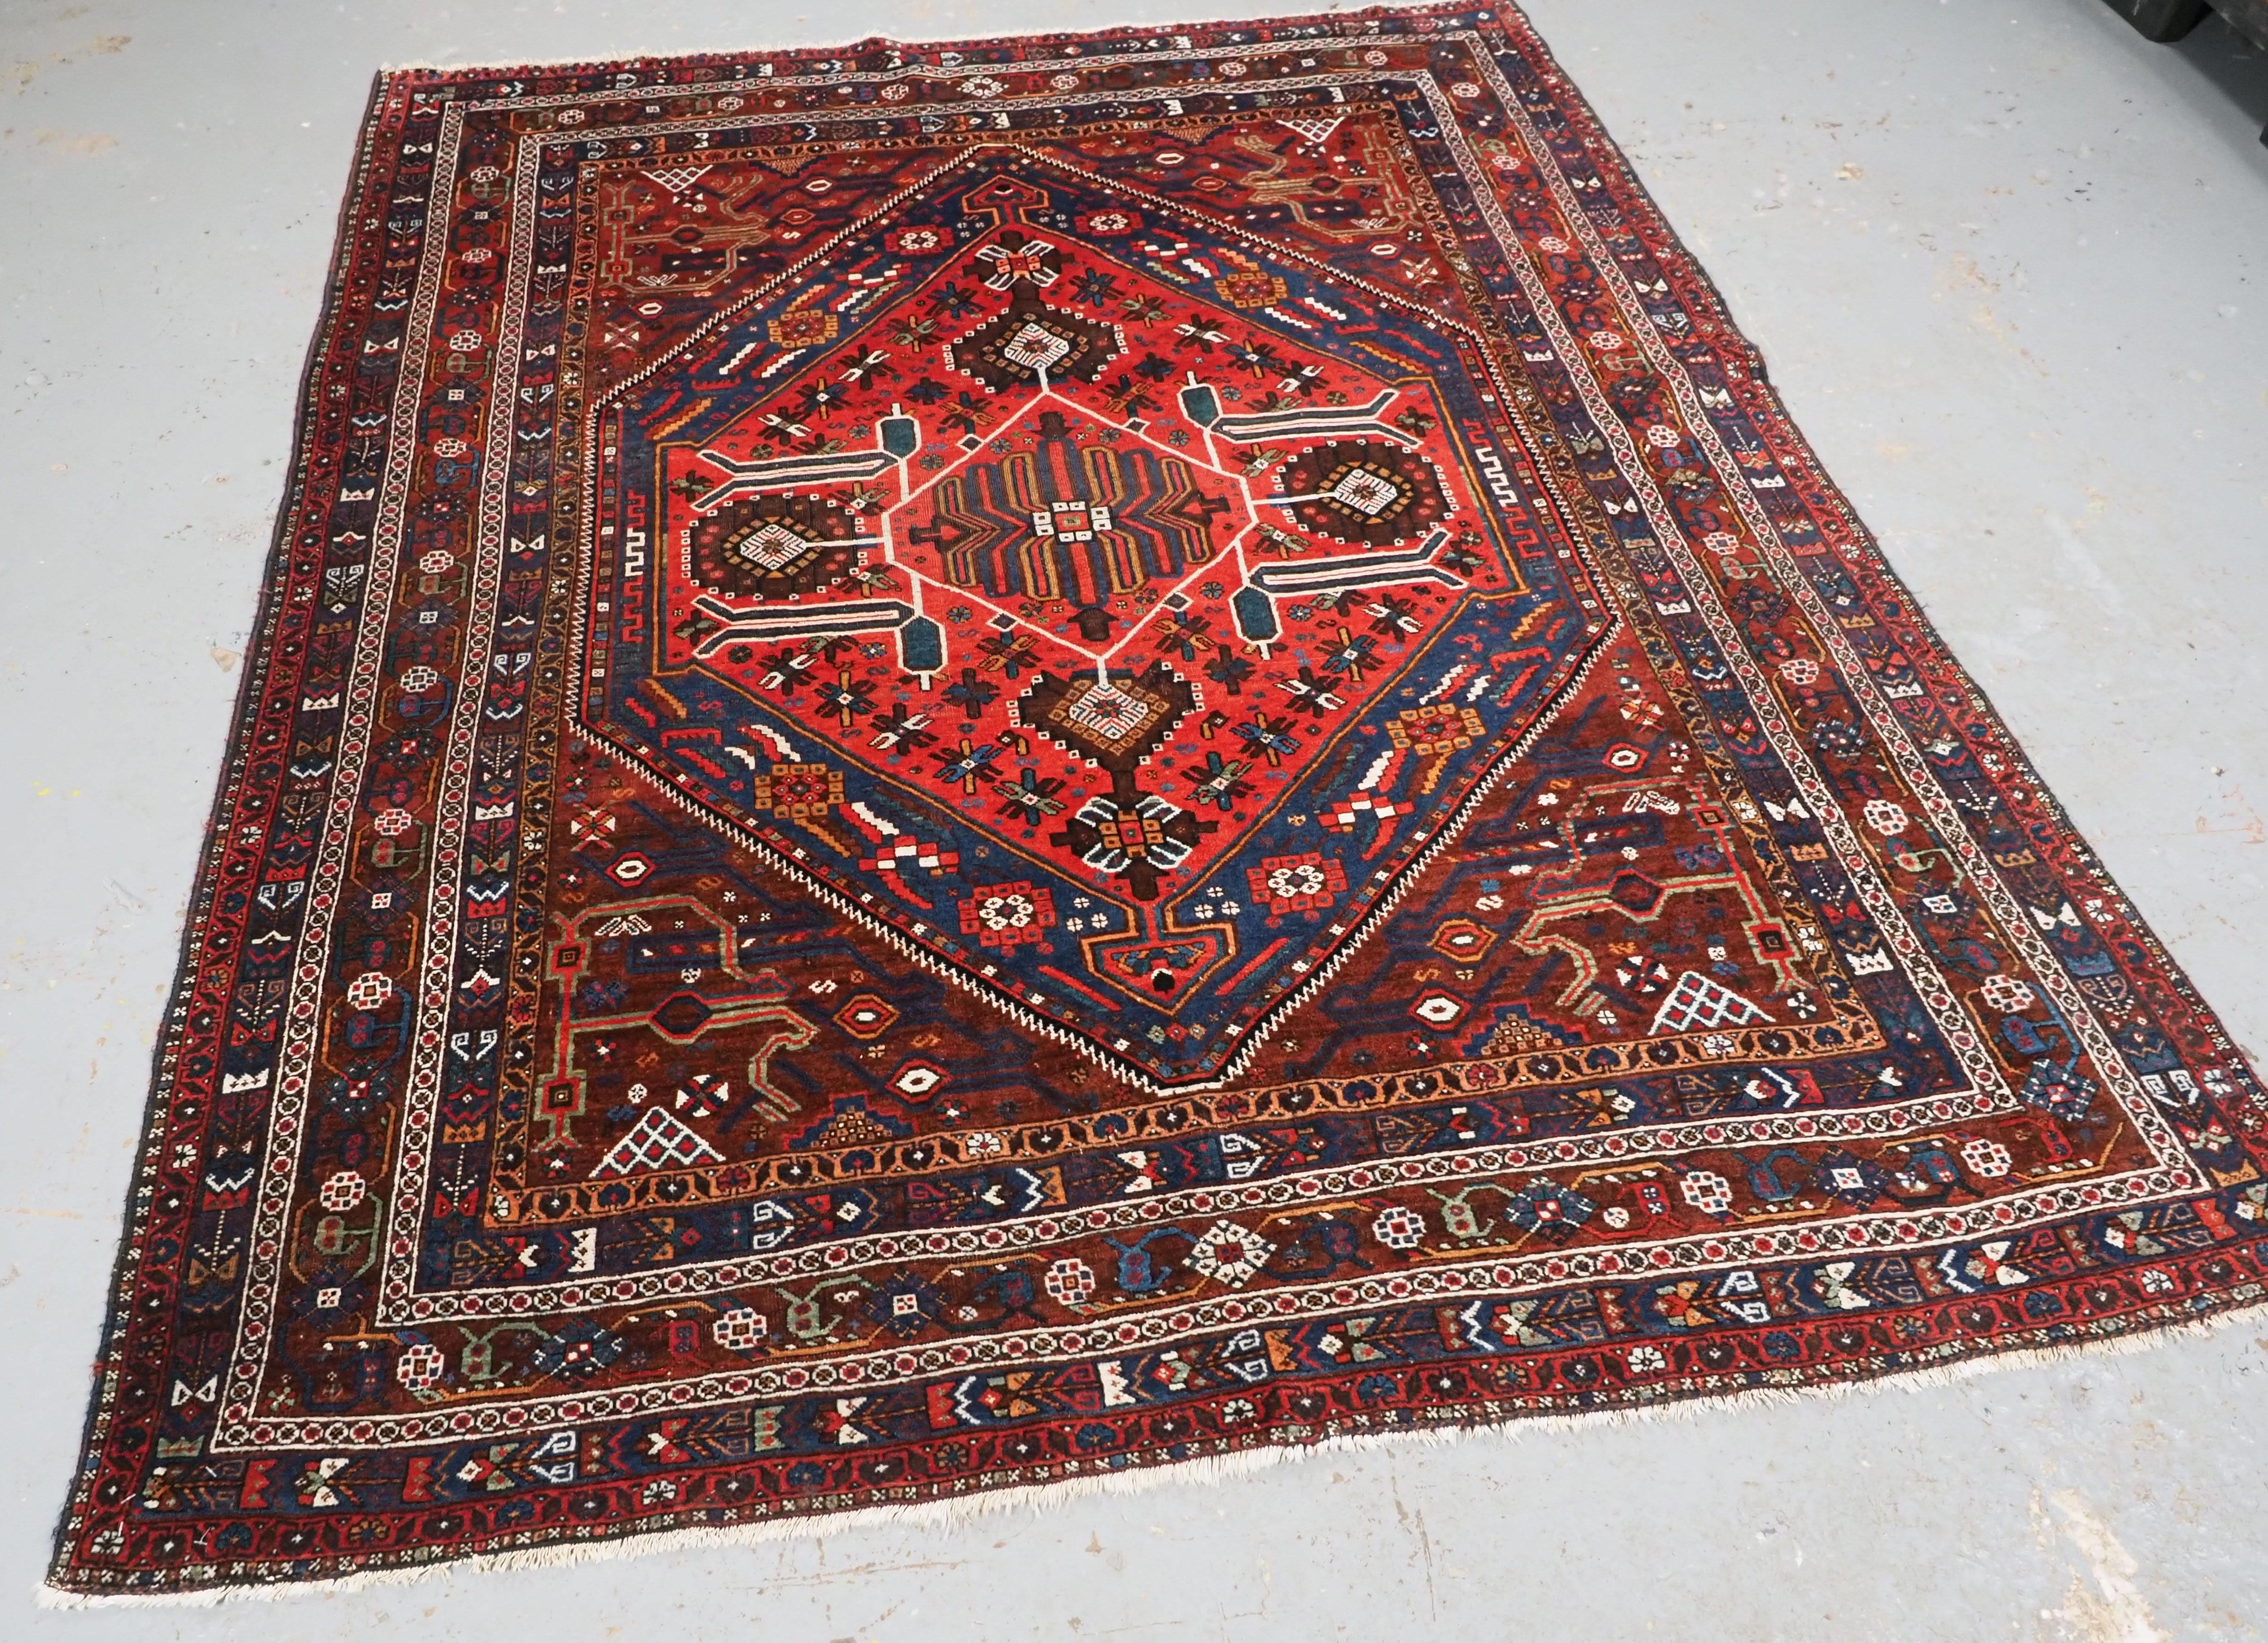 
Size: 6ft 8in x 5ft 3in (202 x 159cm).

Antique  Khamseh Rug with large medallion design.

Circa 1900.

A tribal rug of the classic Khamseh design with a large central medallion containing floral rosettes. The rug has a classic Khamseh border